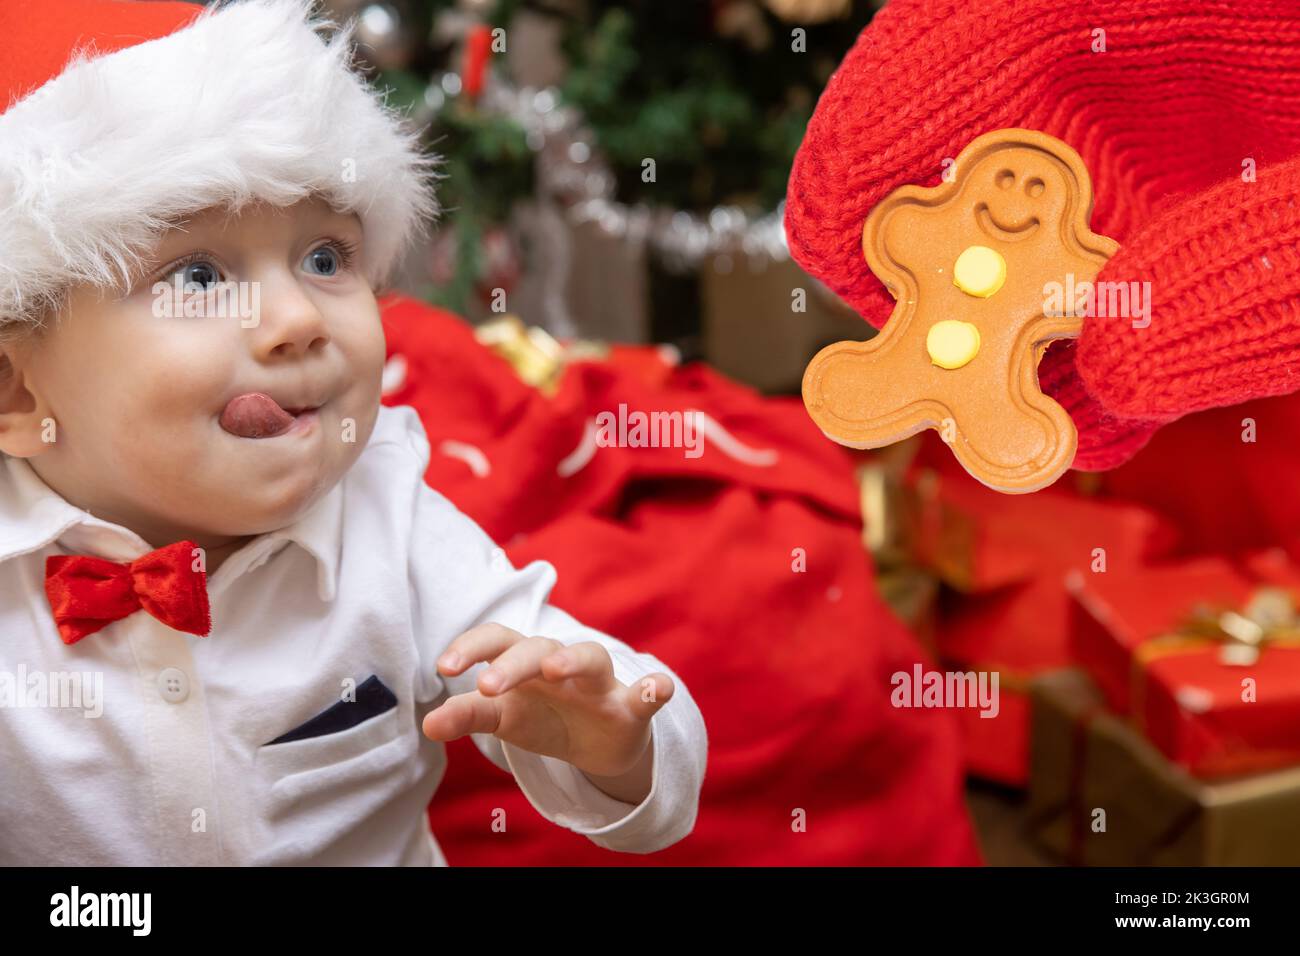 Little boy with a Santa Claus hat looks at gingerbread figurine in a hand Stock Photo